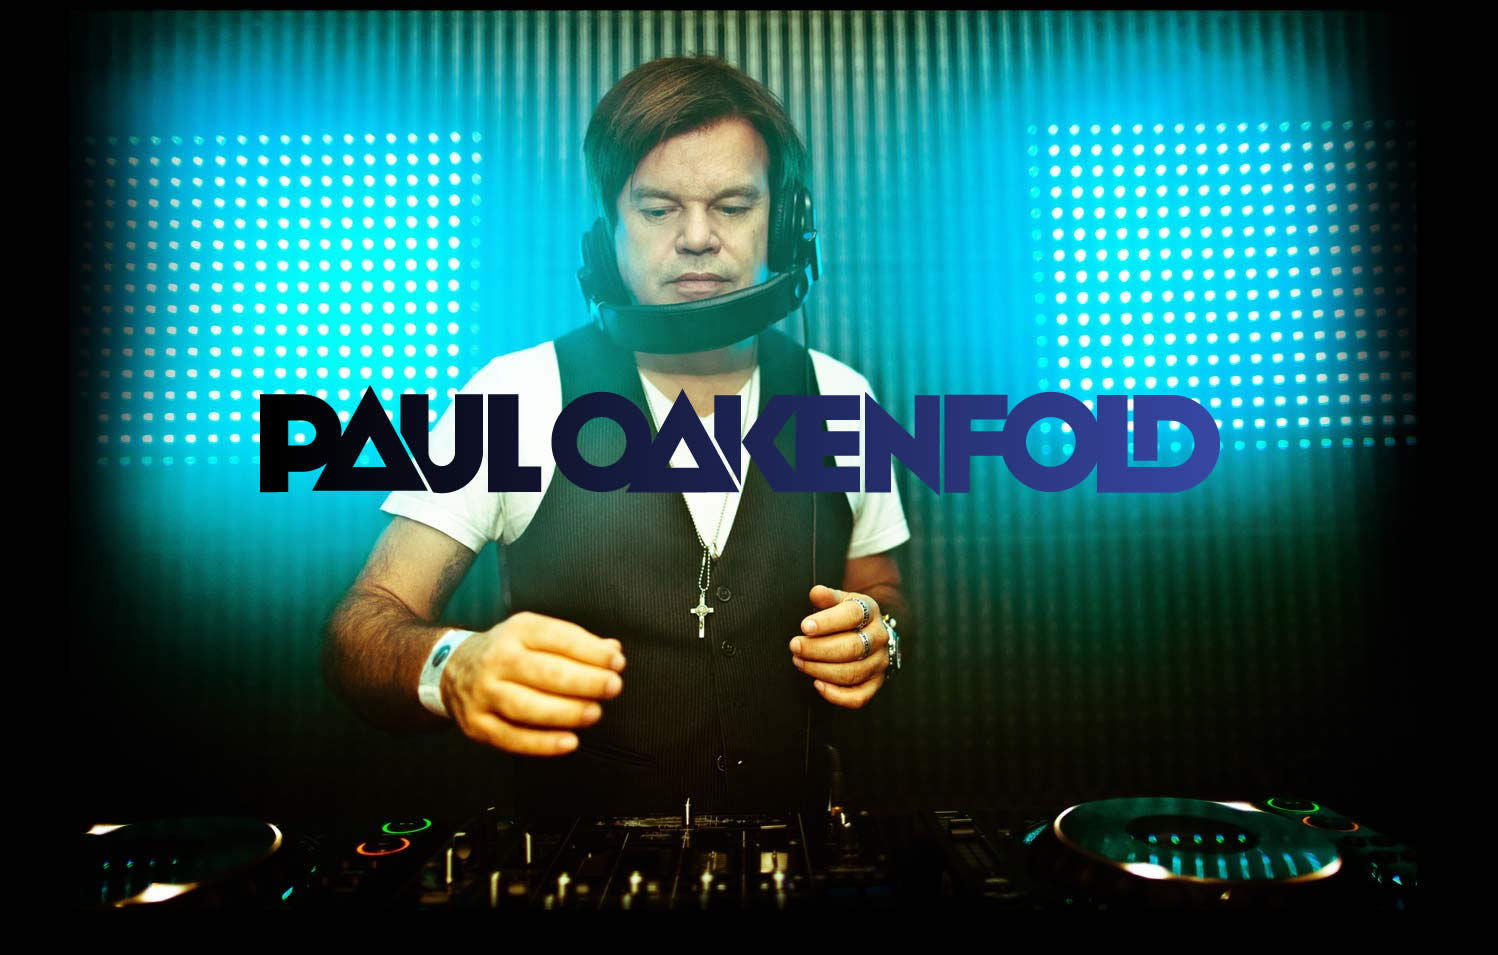 Paul Oakenfold Revisiting The Golden Era Of Trance Music